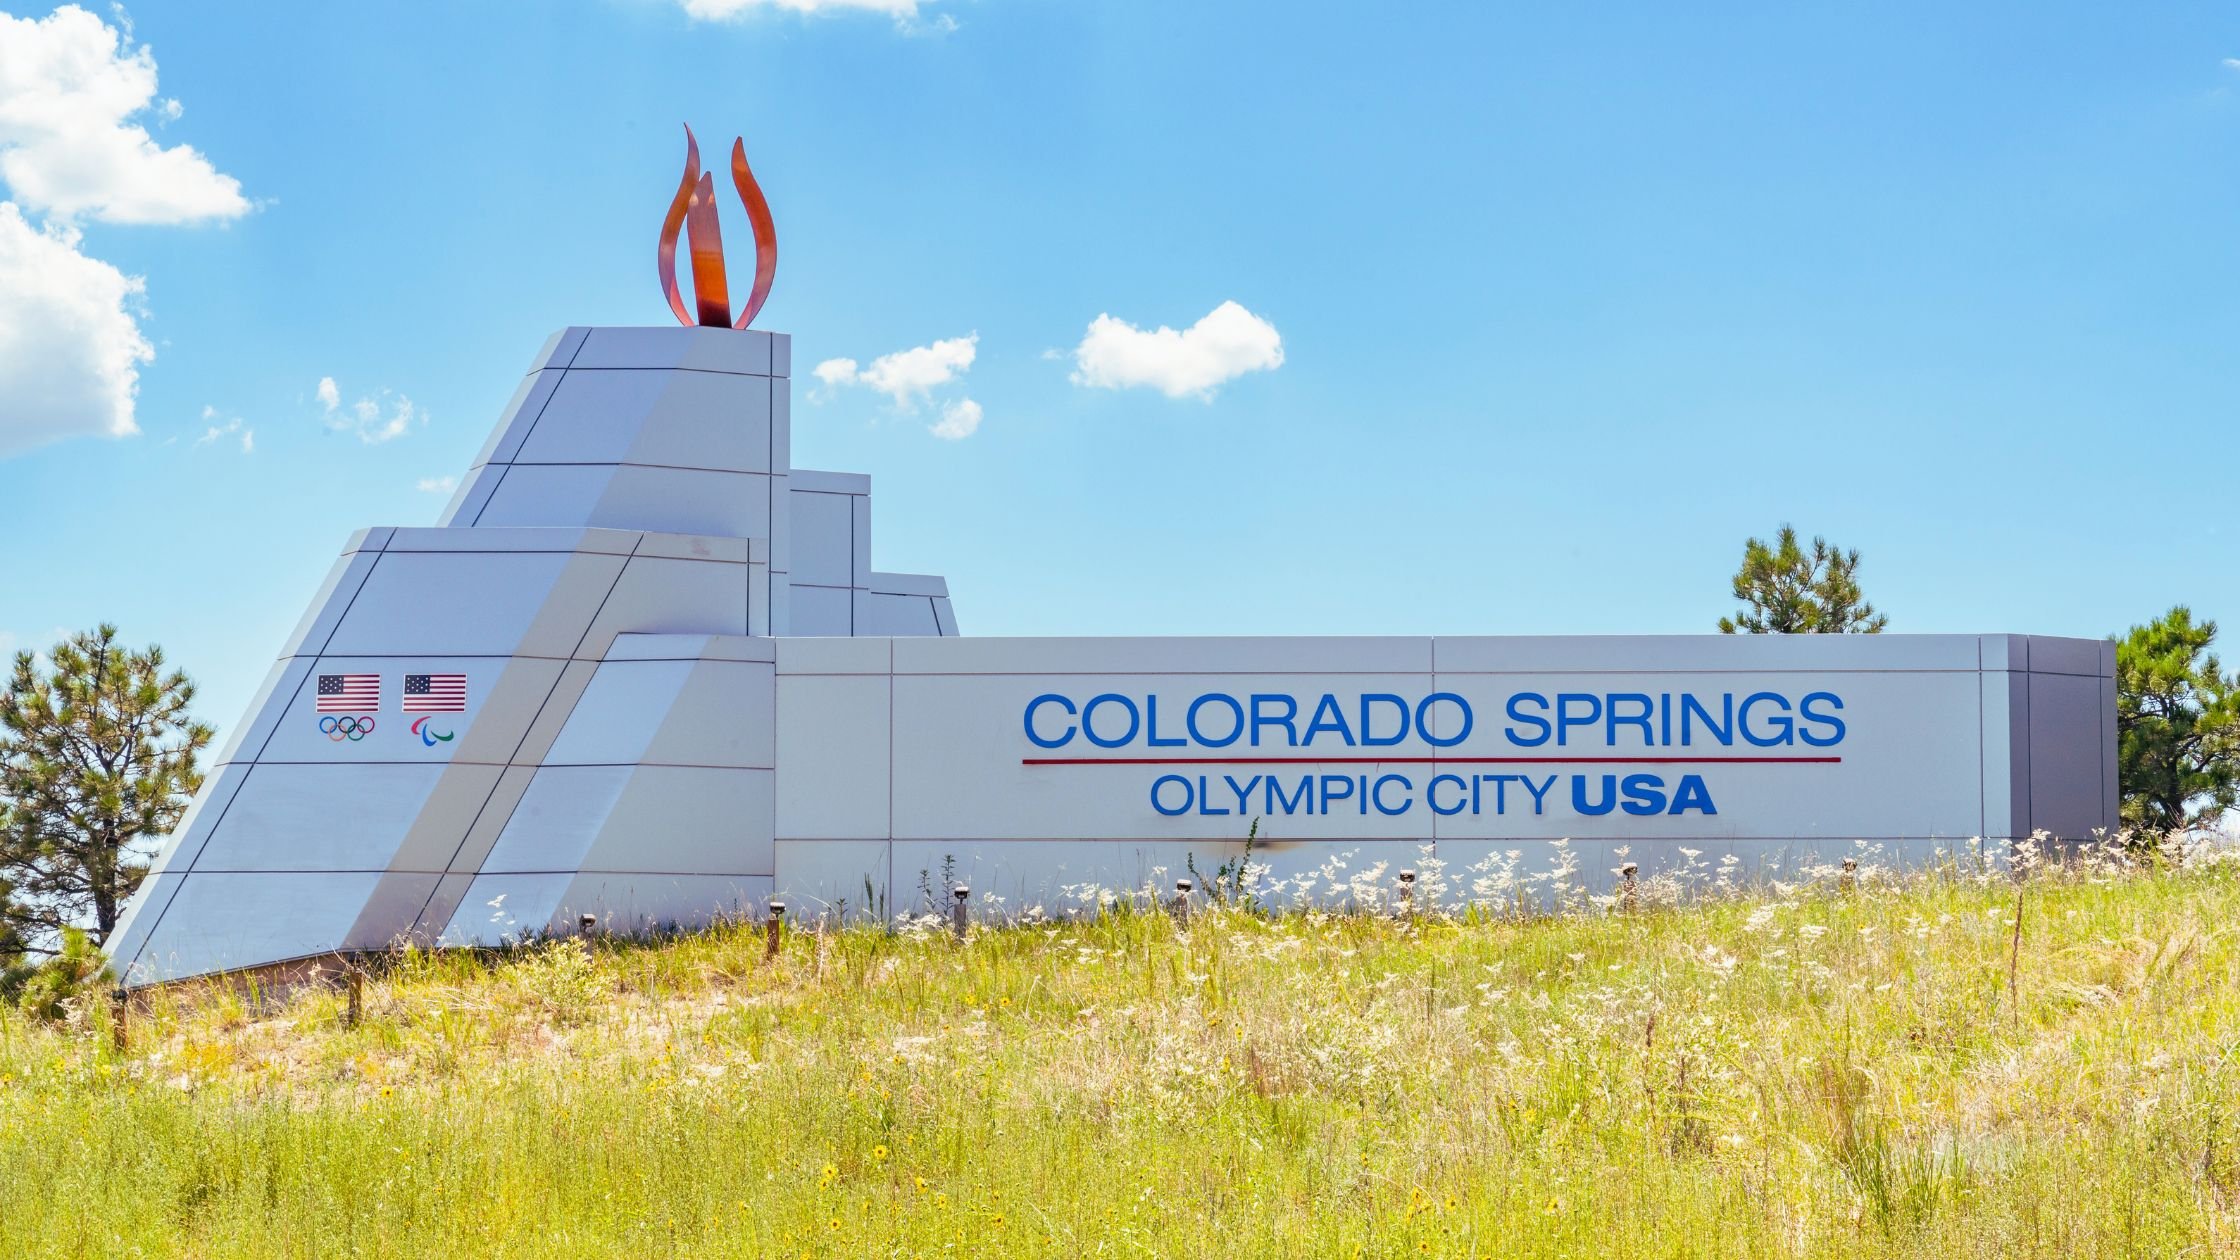 Colorado Springs Image of Olympic City USA Sign